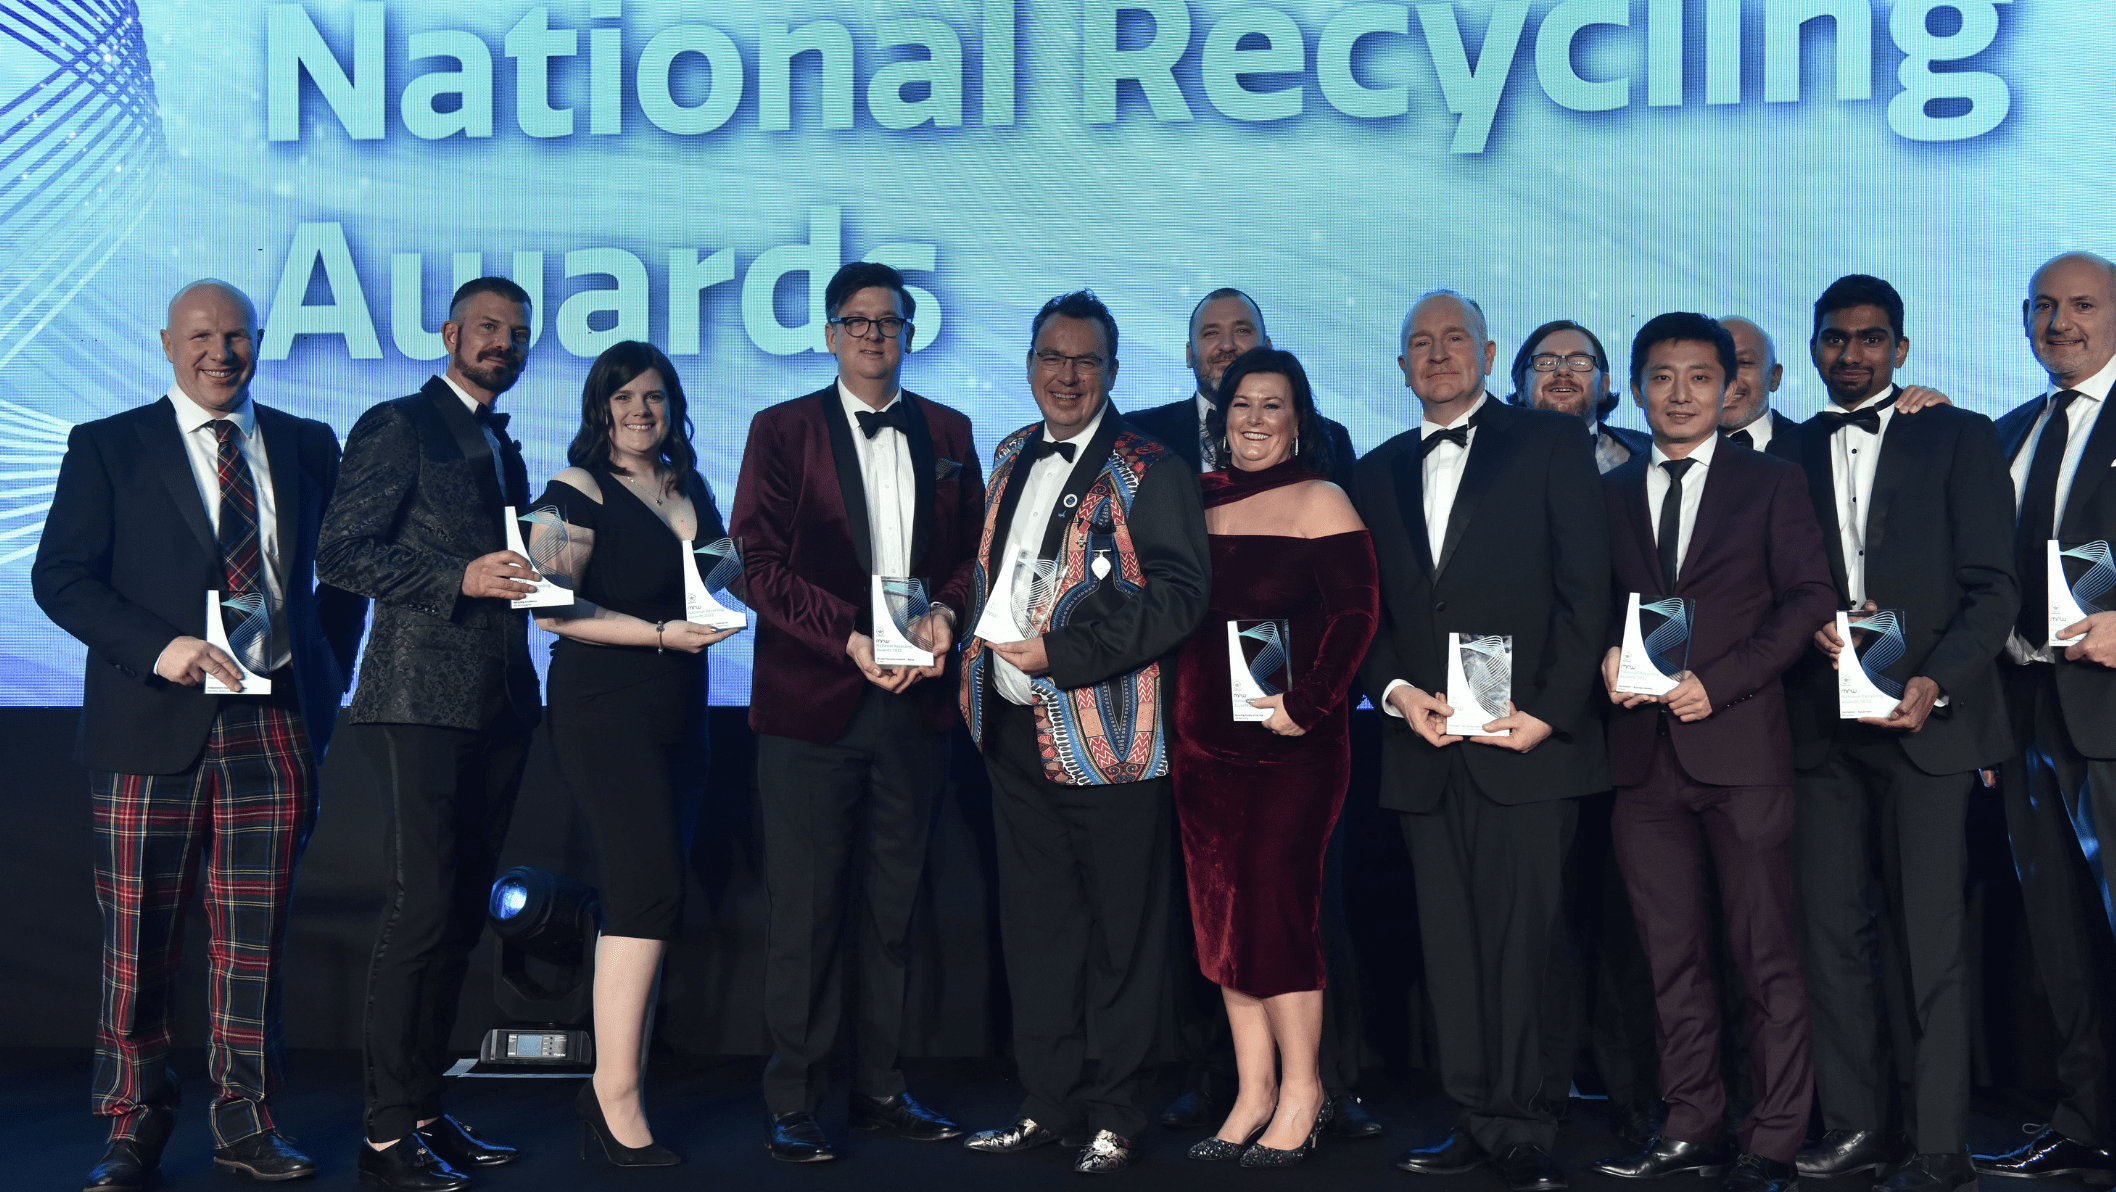 Recycleye wins coveted National Recycling Award for Robotic Equipment Innovation